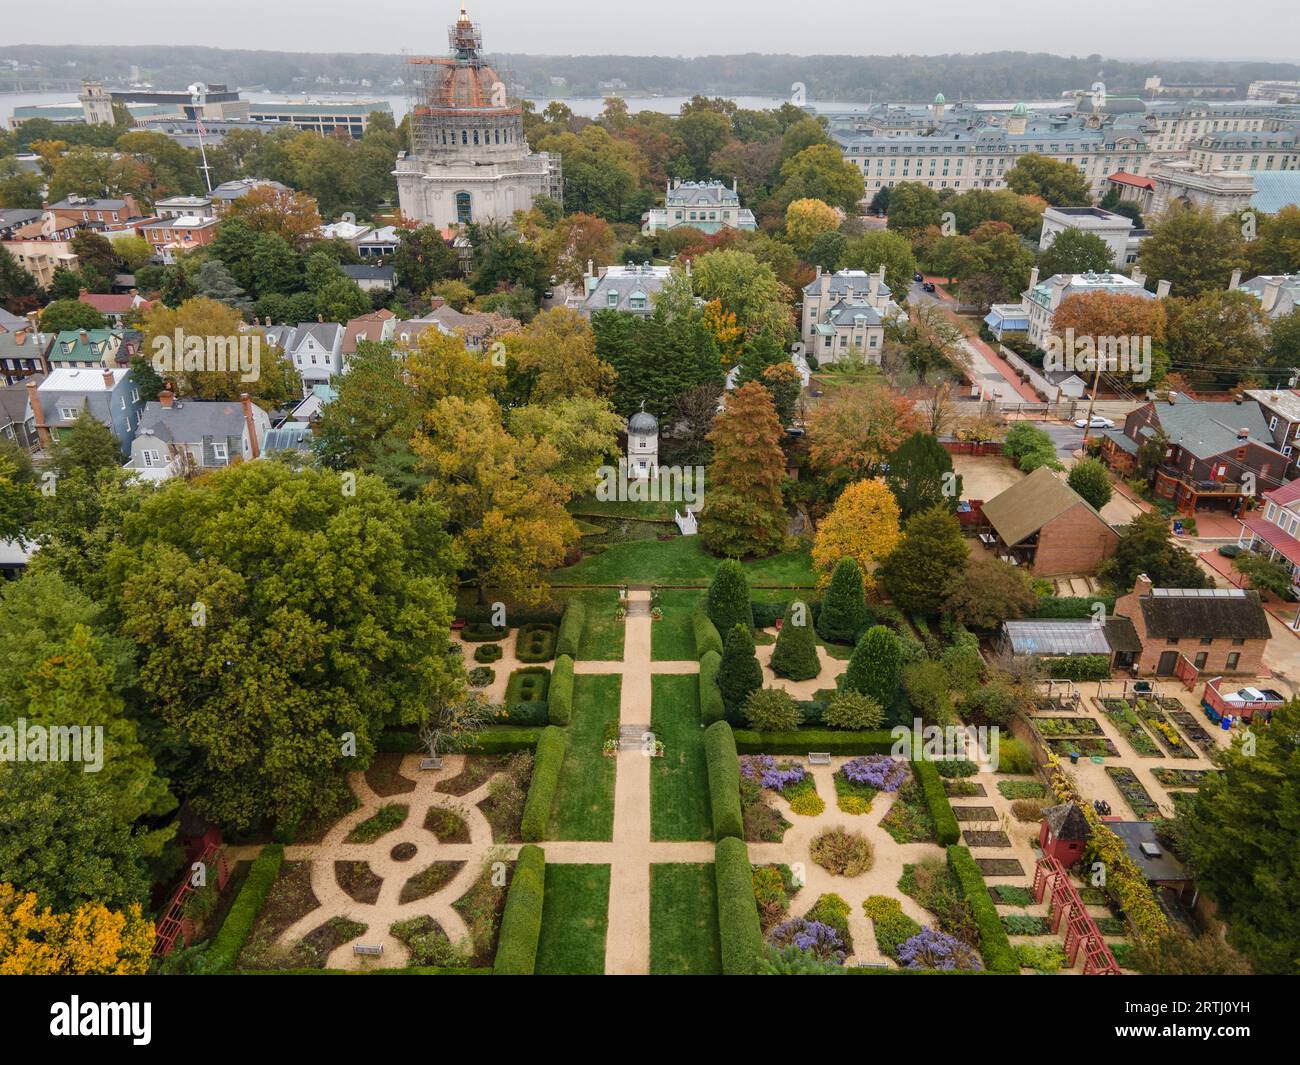 Aerial view of William Paca Garden with the Naval Academy Chapel in the background in Annapolis, Maryland Stock Photo